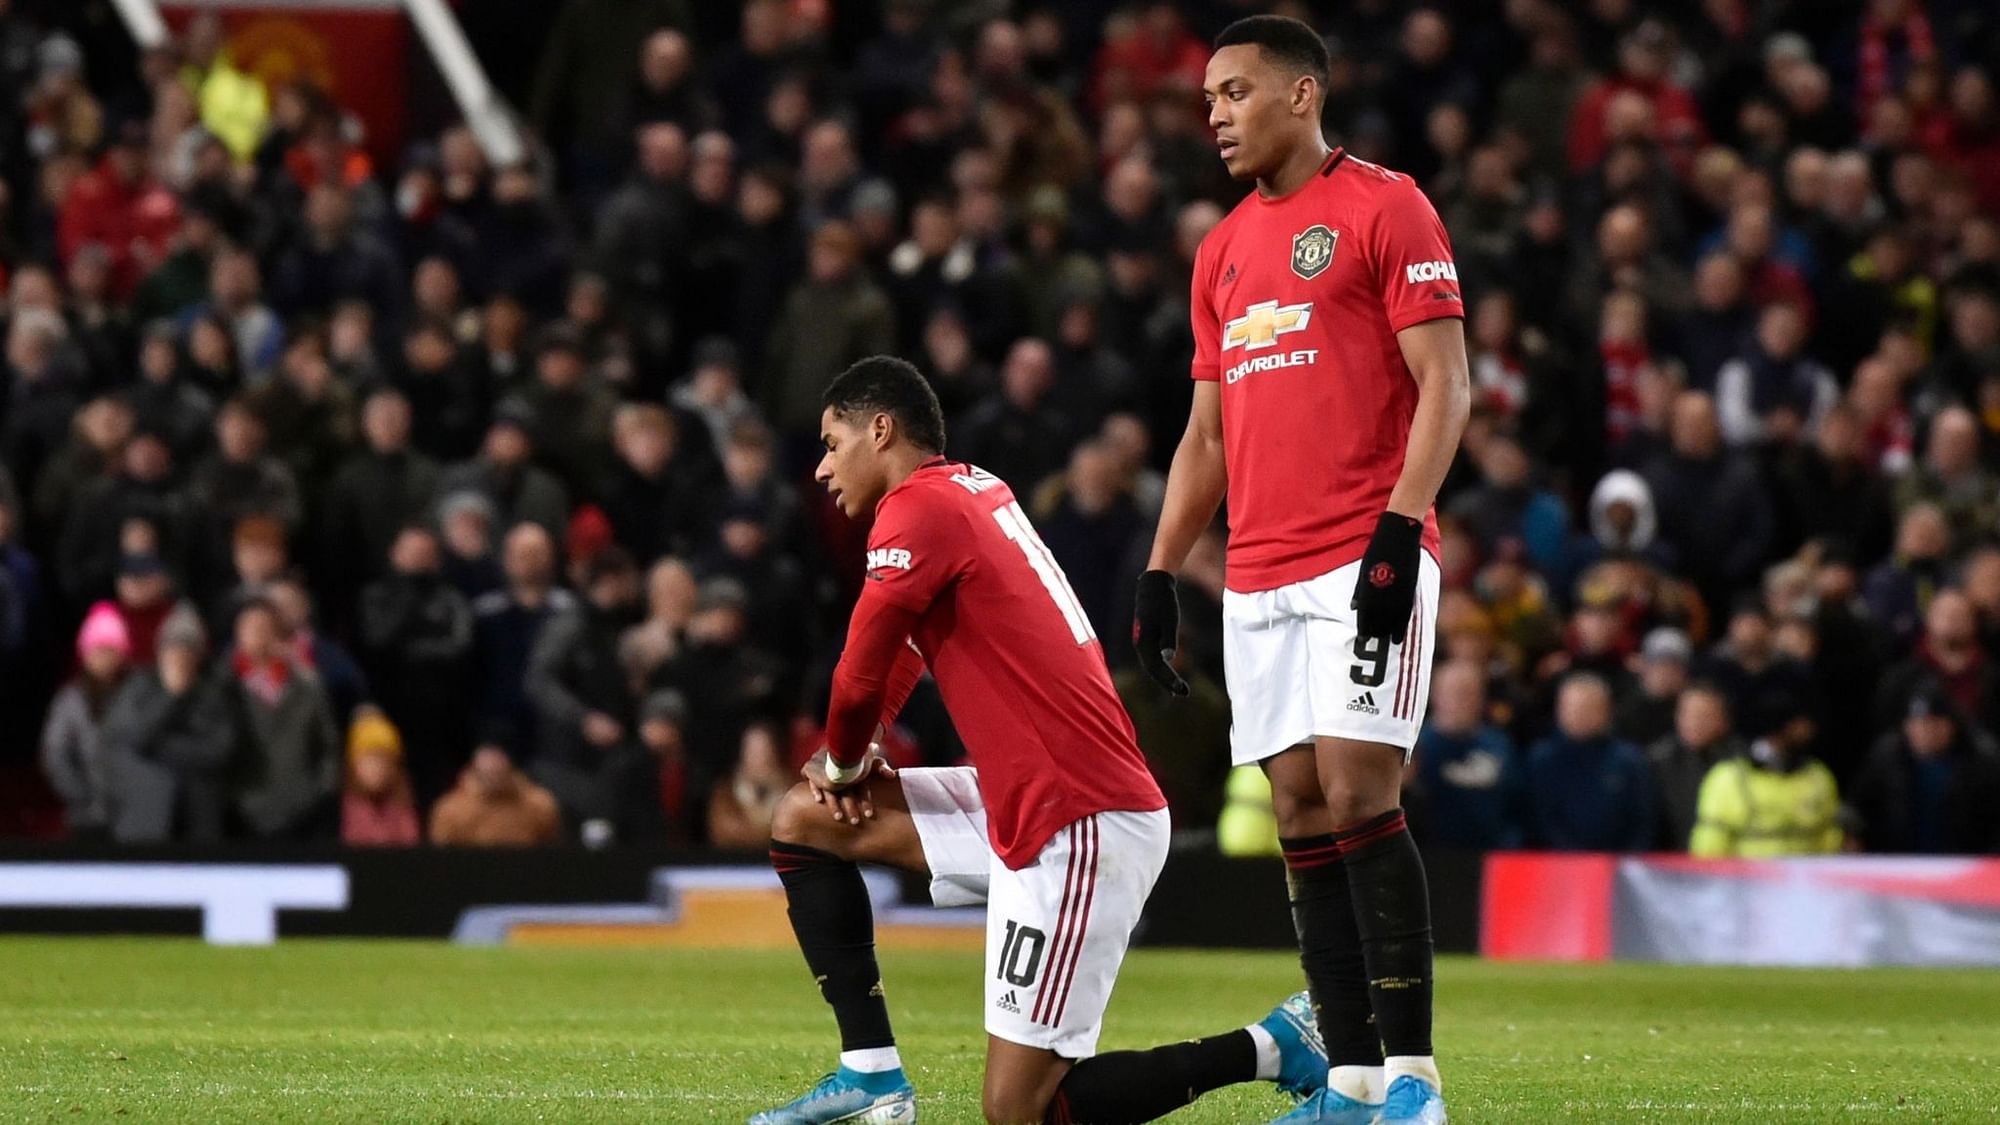 Rashford sustained the injury after being introduced as a second-half substitute in Wednesday’s 1-0 FA Cup third-round replay win over Wolves.